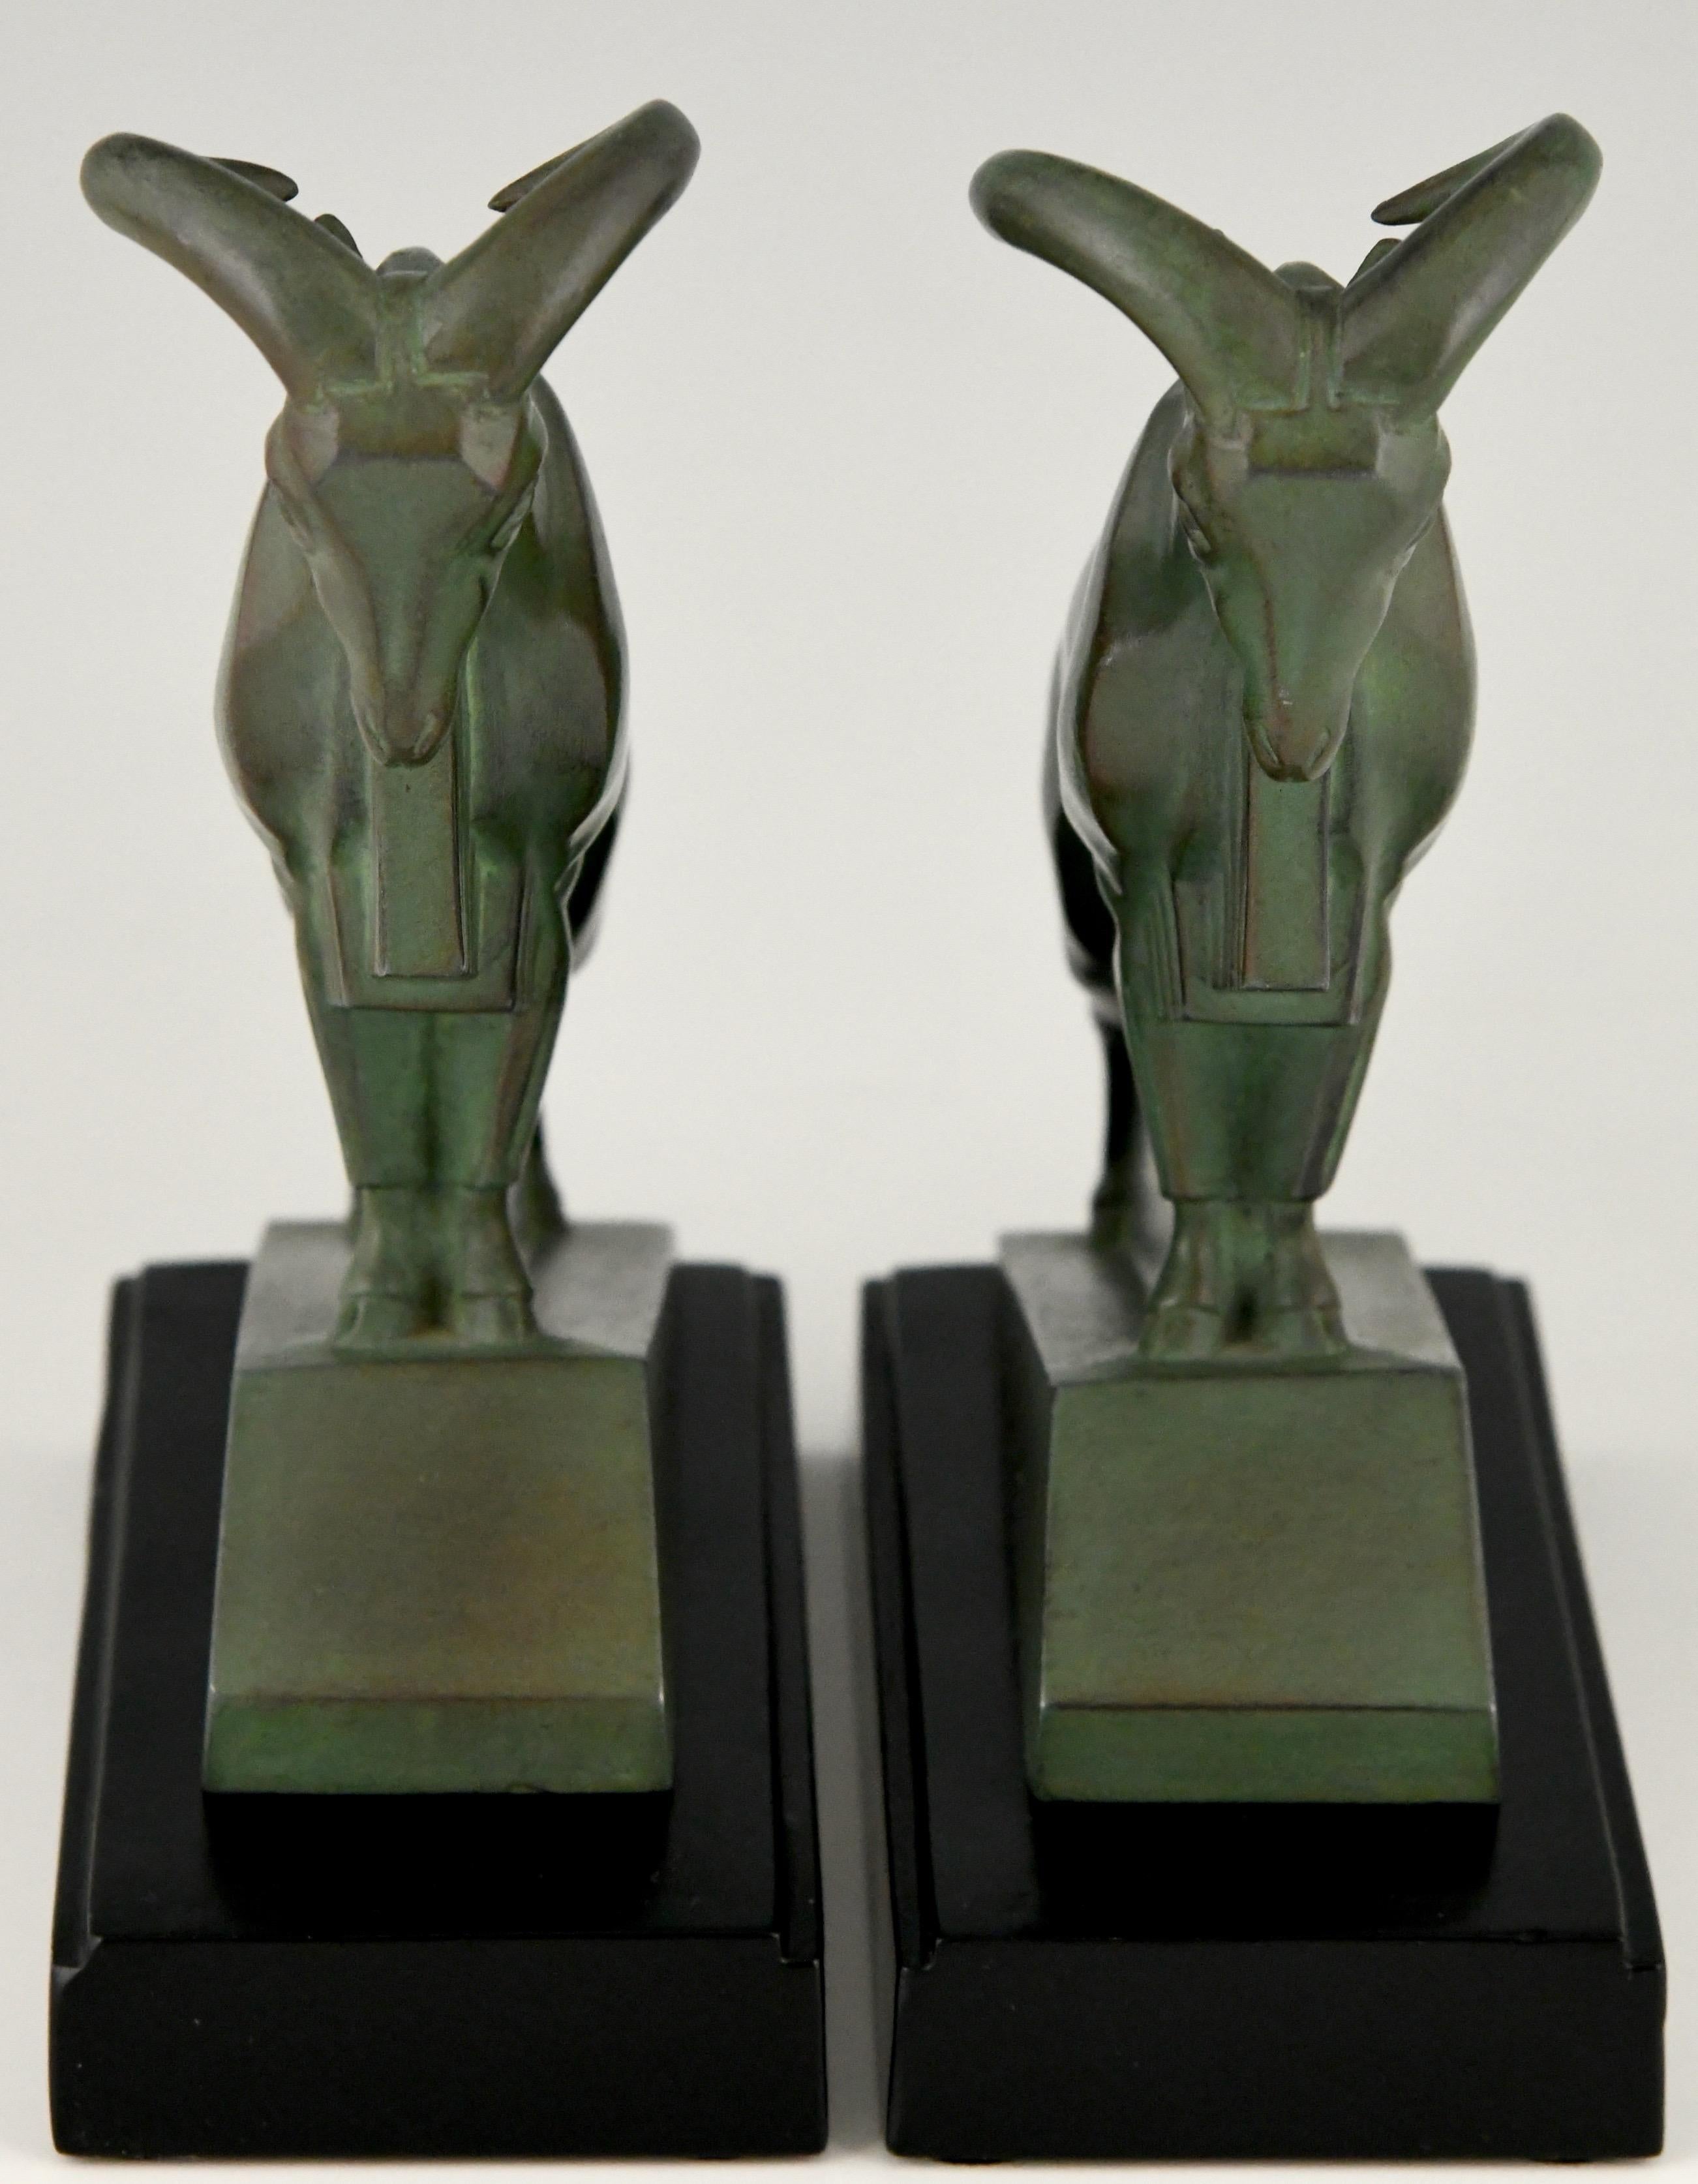 Patinated Art Deco Ibex or Ram Bookends Signed by the Sculptor Max Le Verrier France, 1930 For Sale